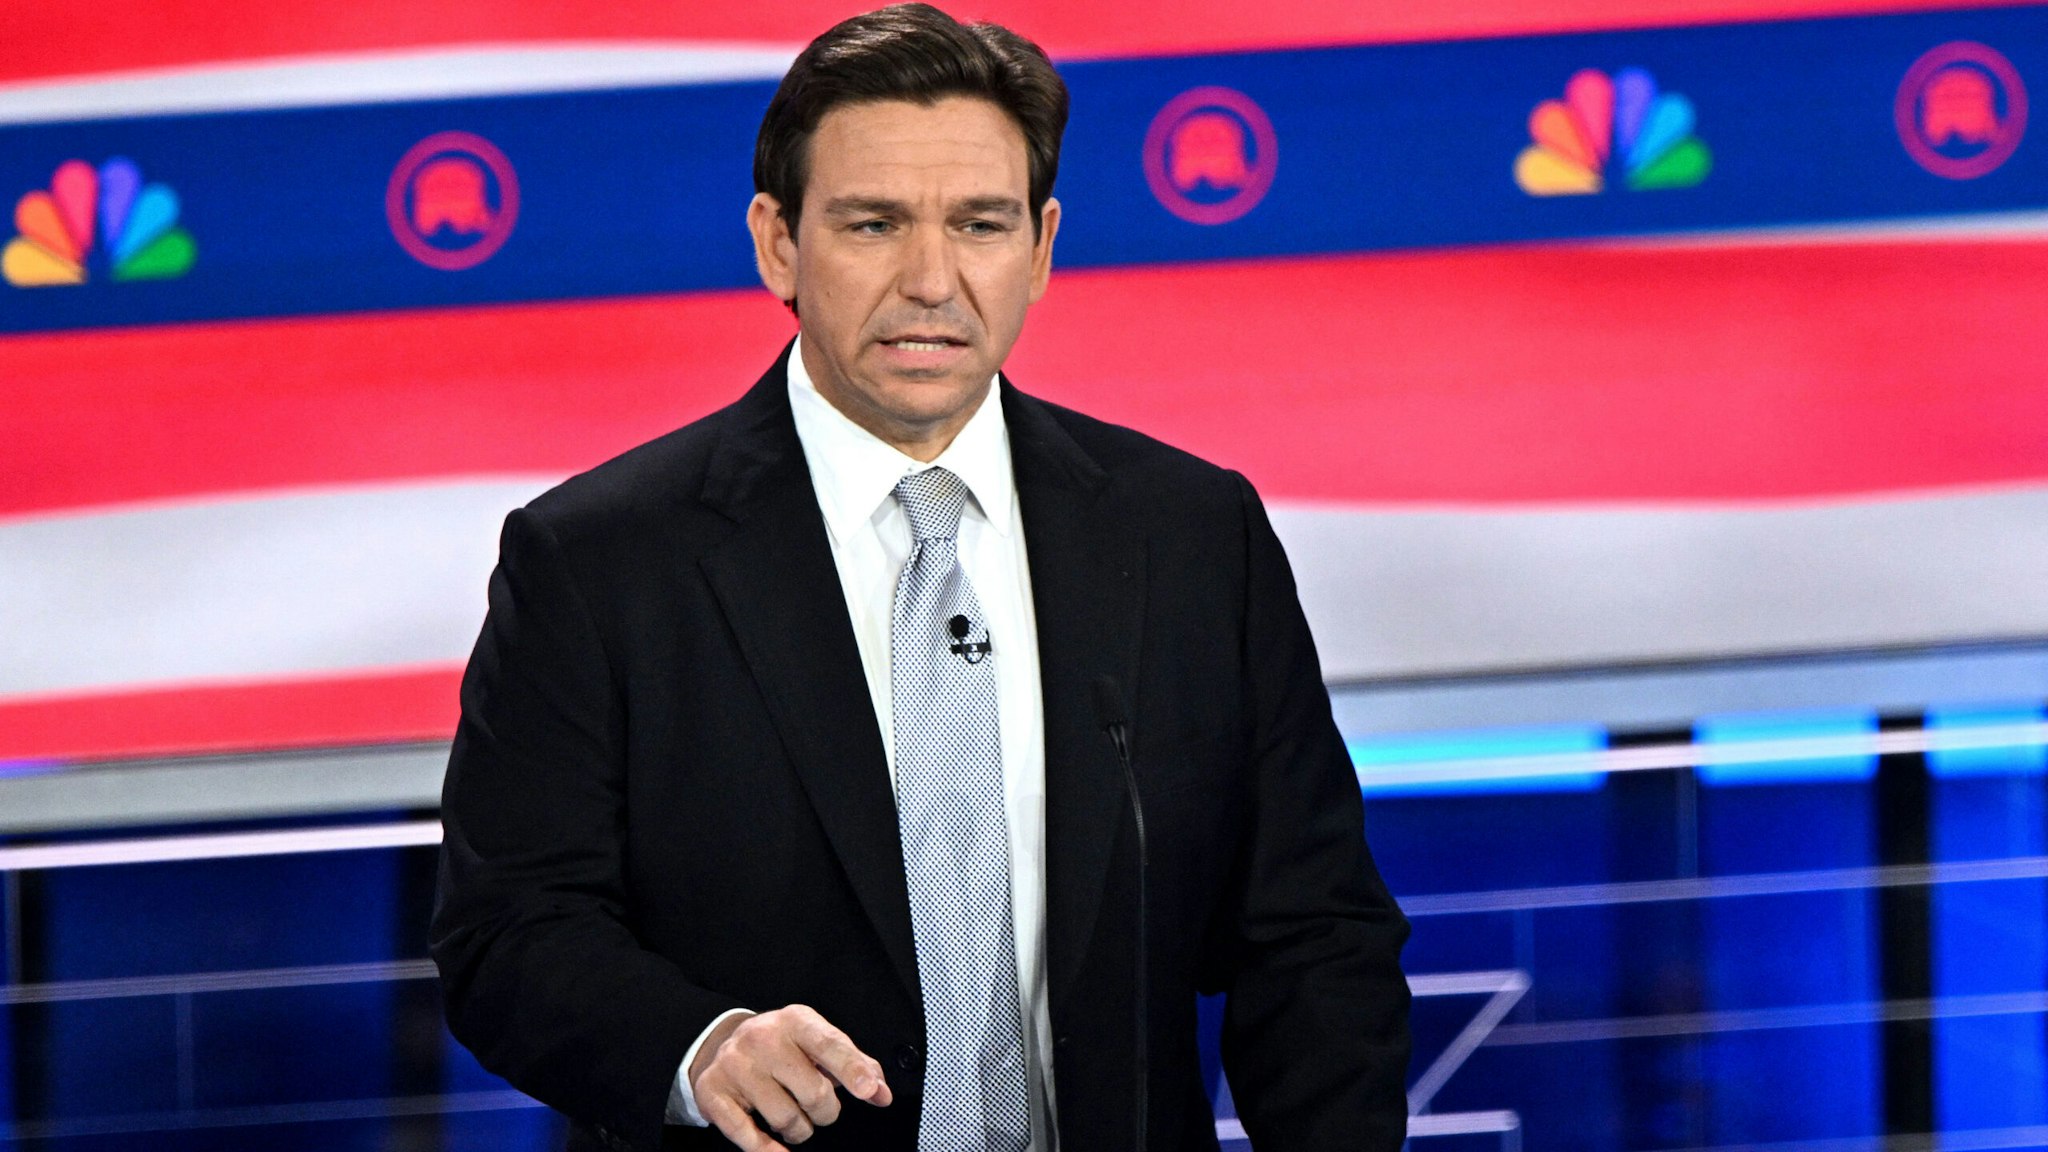 Florida Governor Ron DeSantis speaks during the third Republican presidential primary debate at the Knight Concert Hall at the Adrienne Arsht Center for the Performing Arts in Miami, Florida, on November 8, 2023.